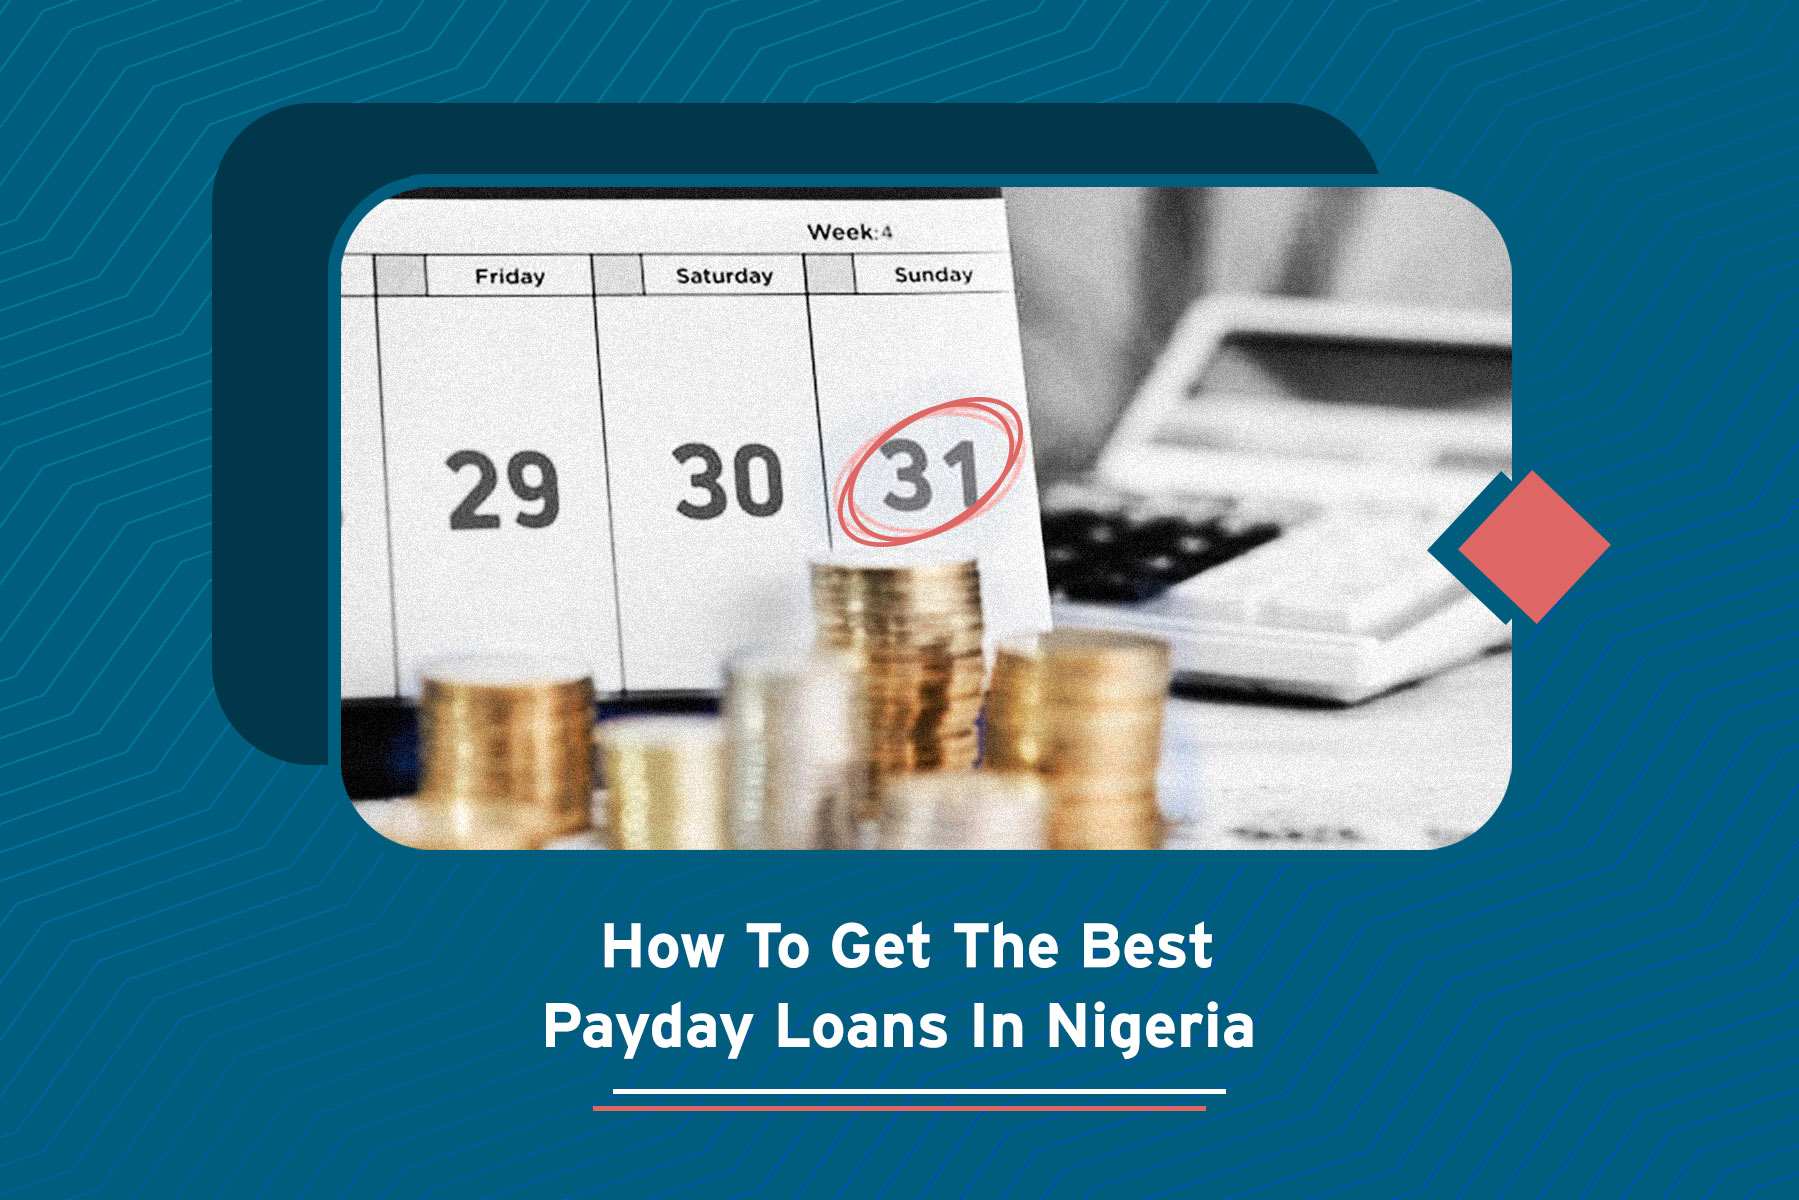 How To Get The Best Payday Loans In Nigeria